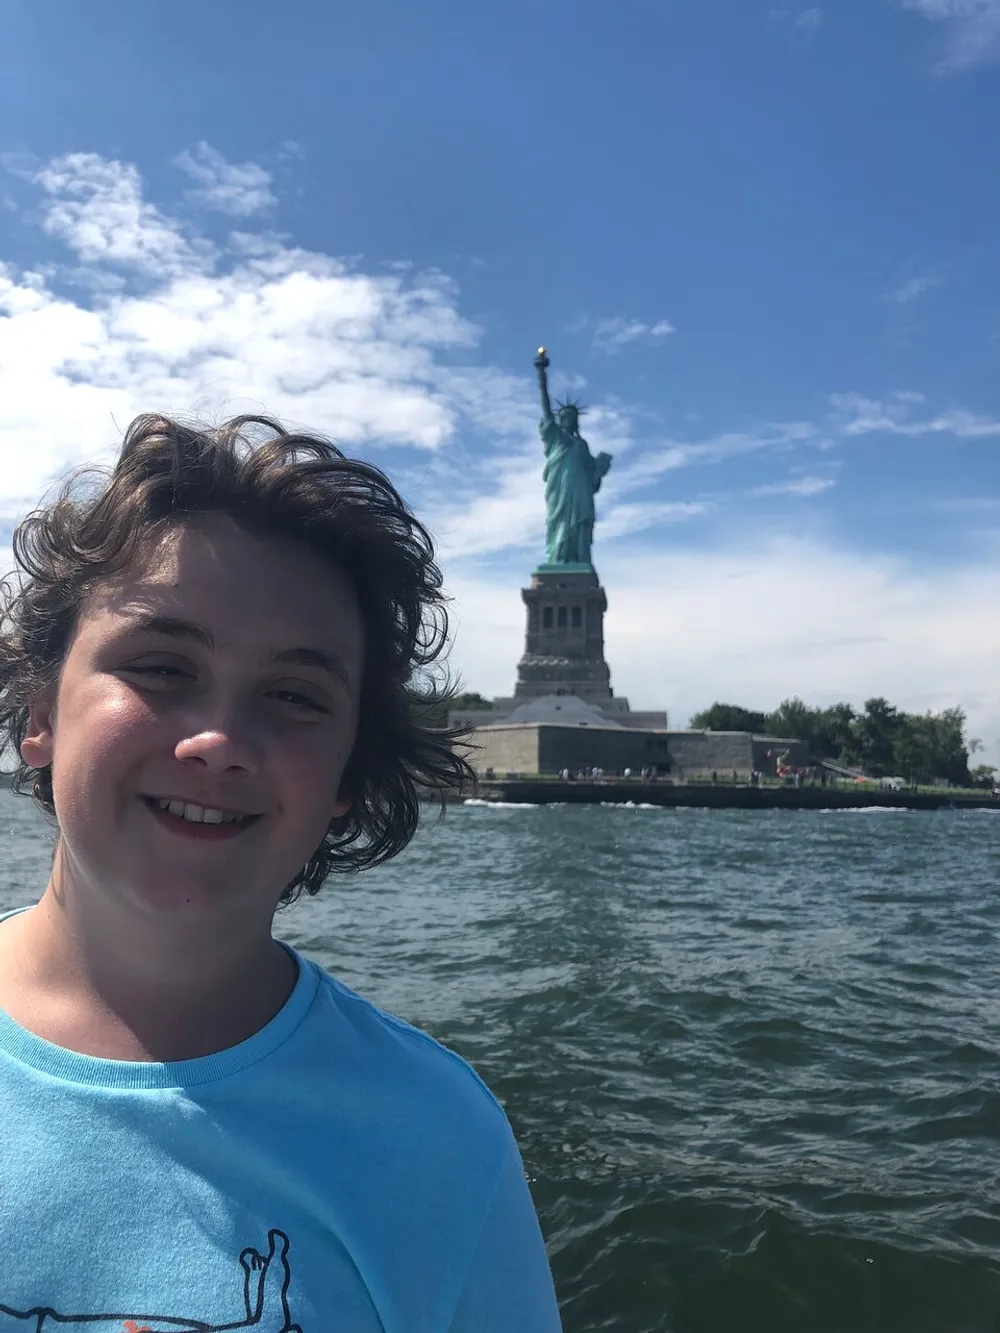 A smiling person is posing in the foreground with the Statue of Liberty visible in the background